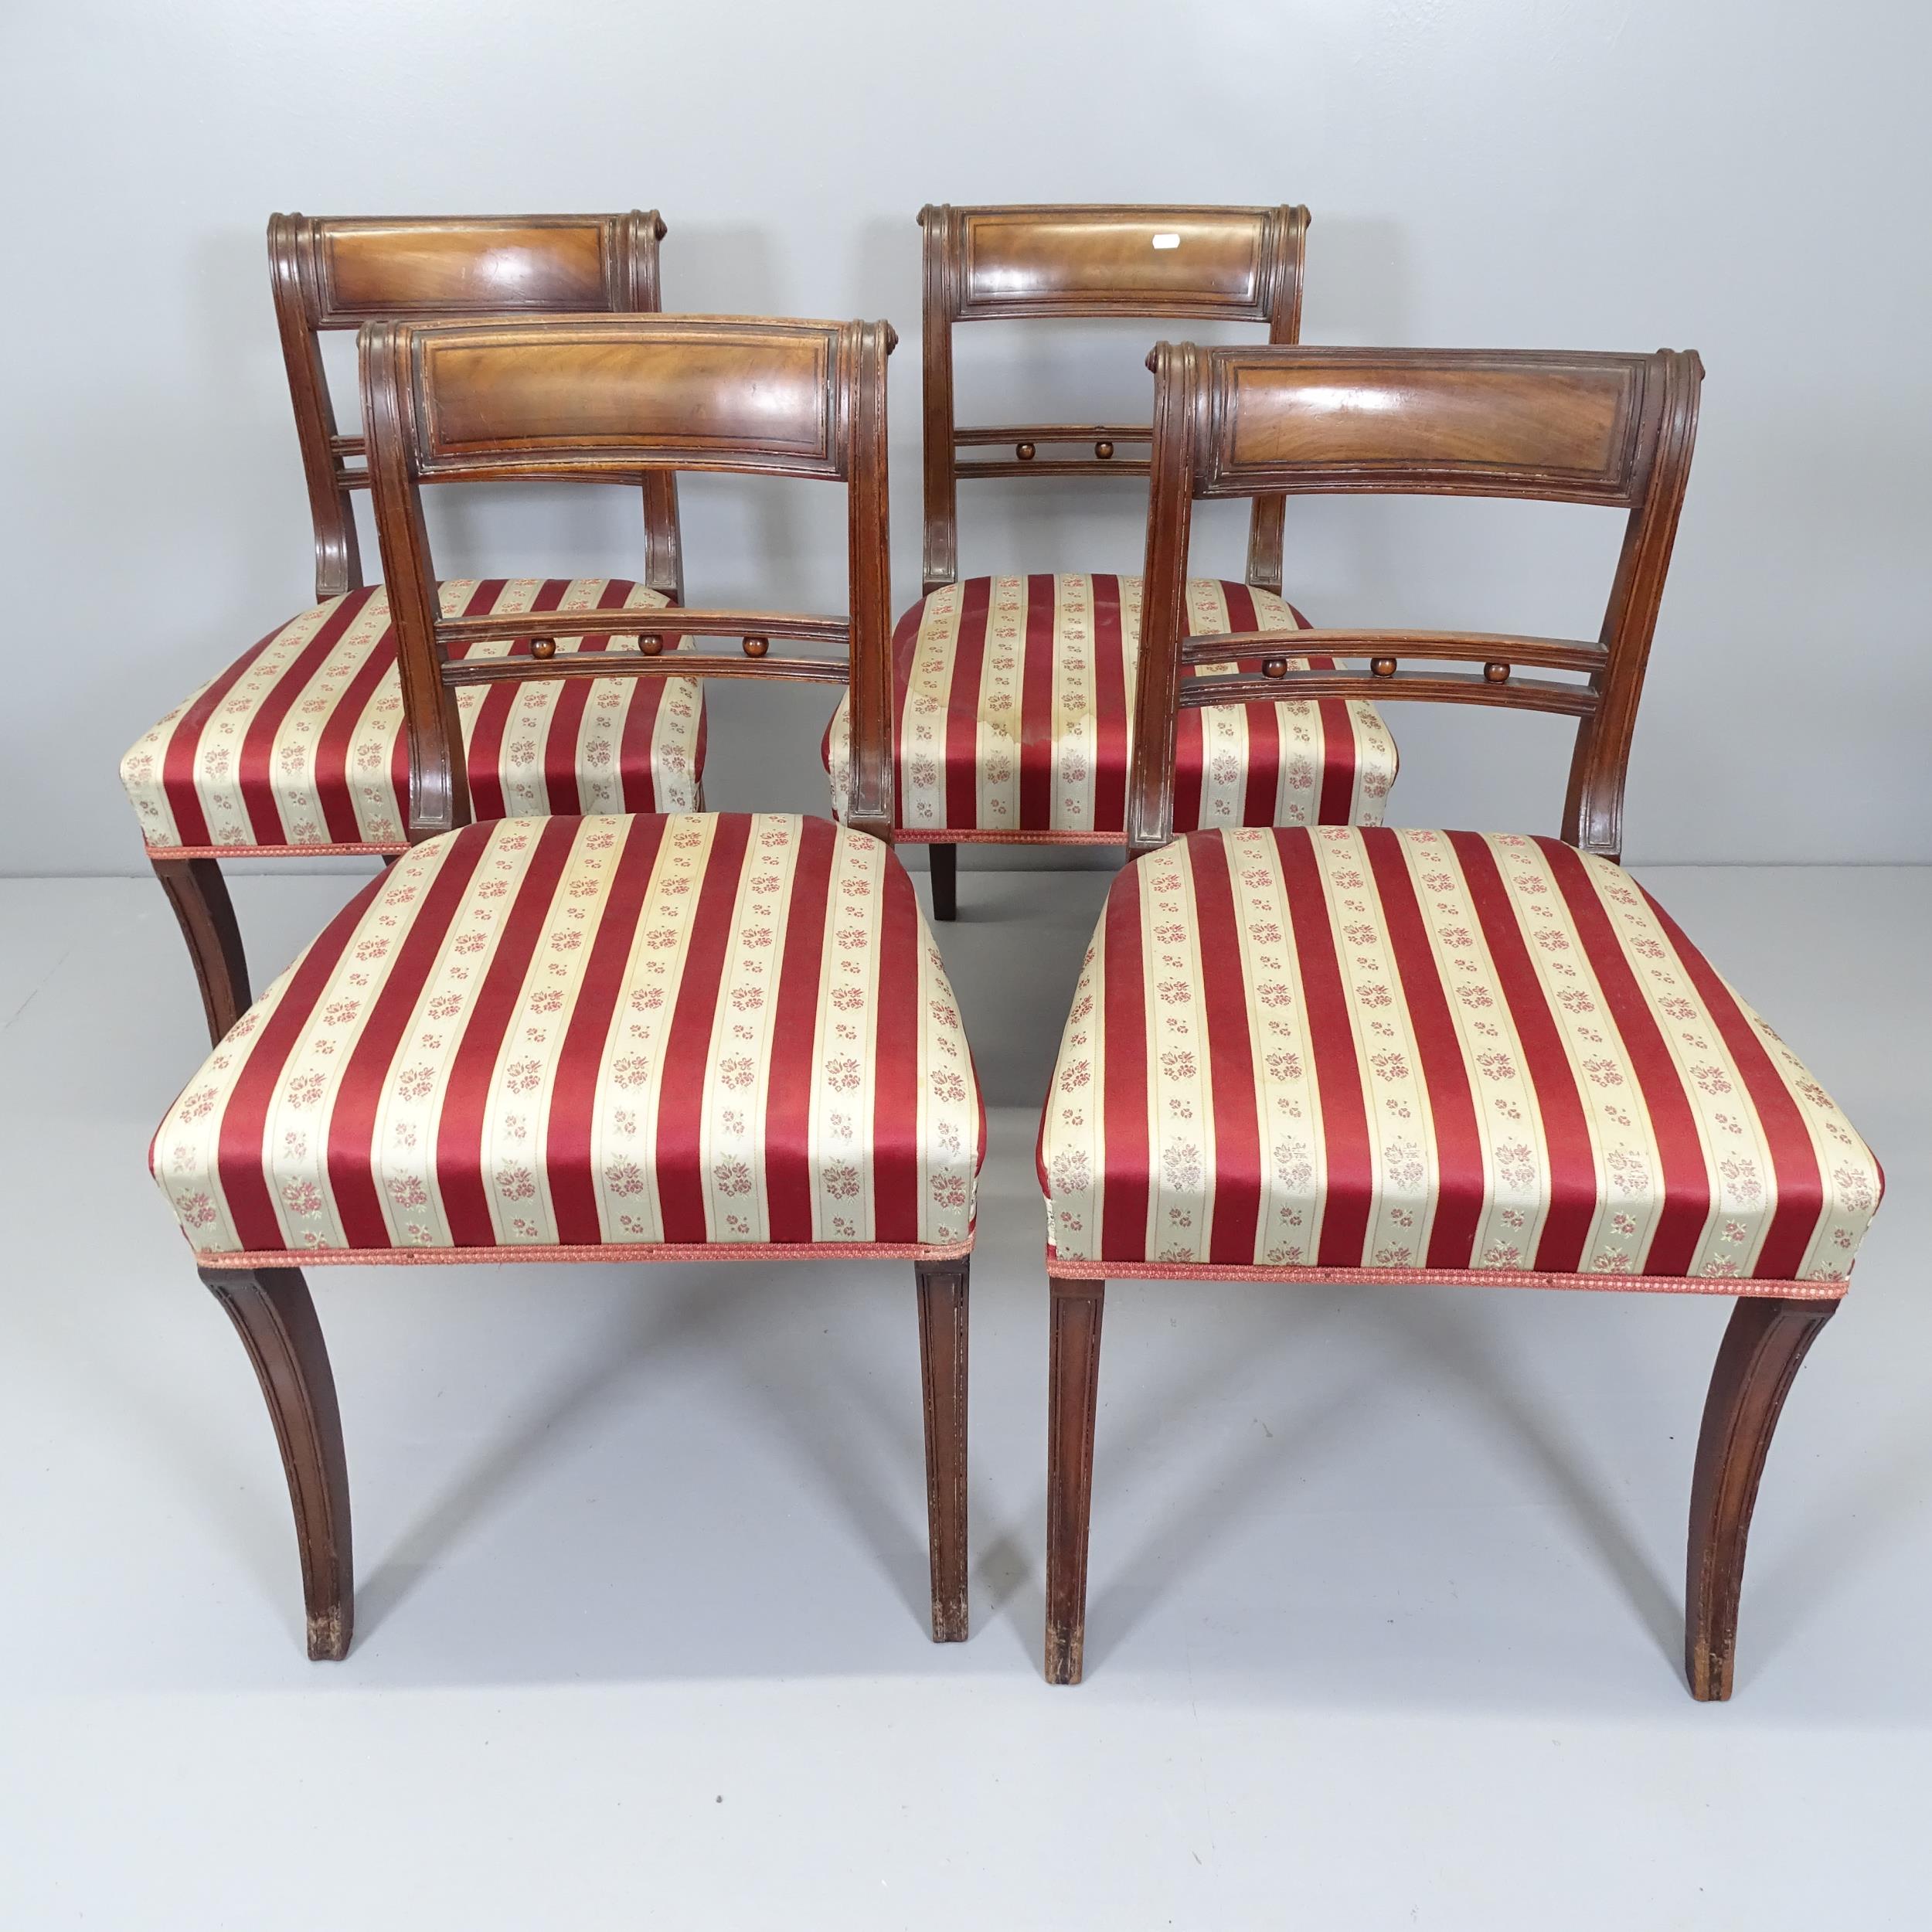 A set of four Georgian mahogany dining chairs.